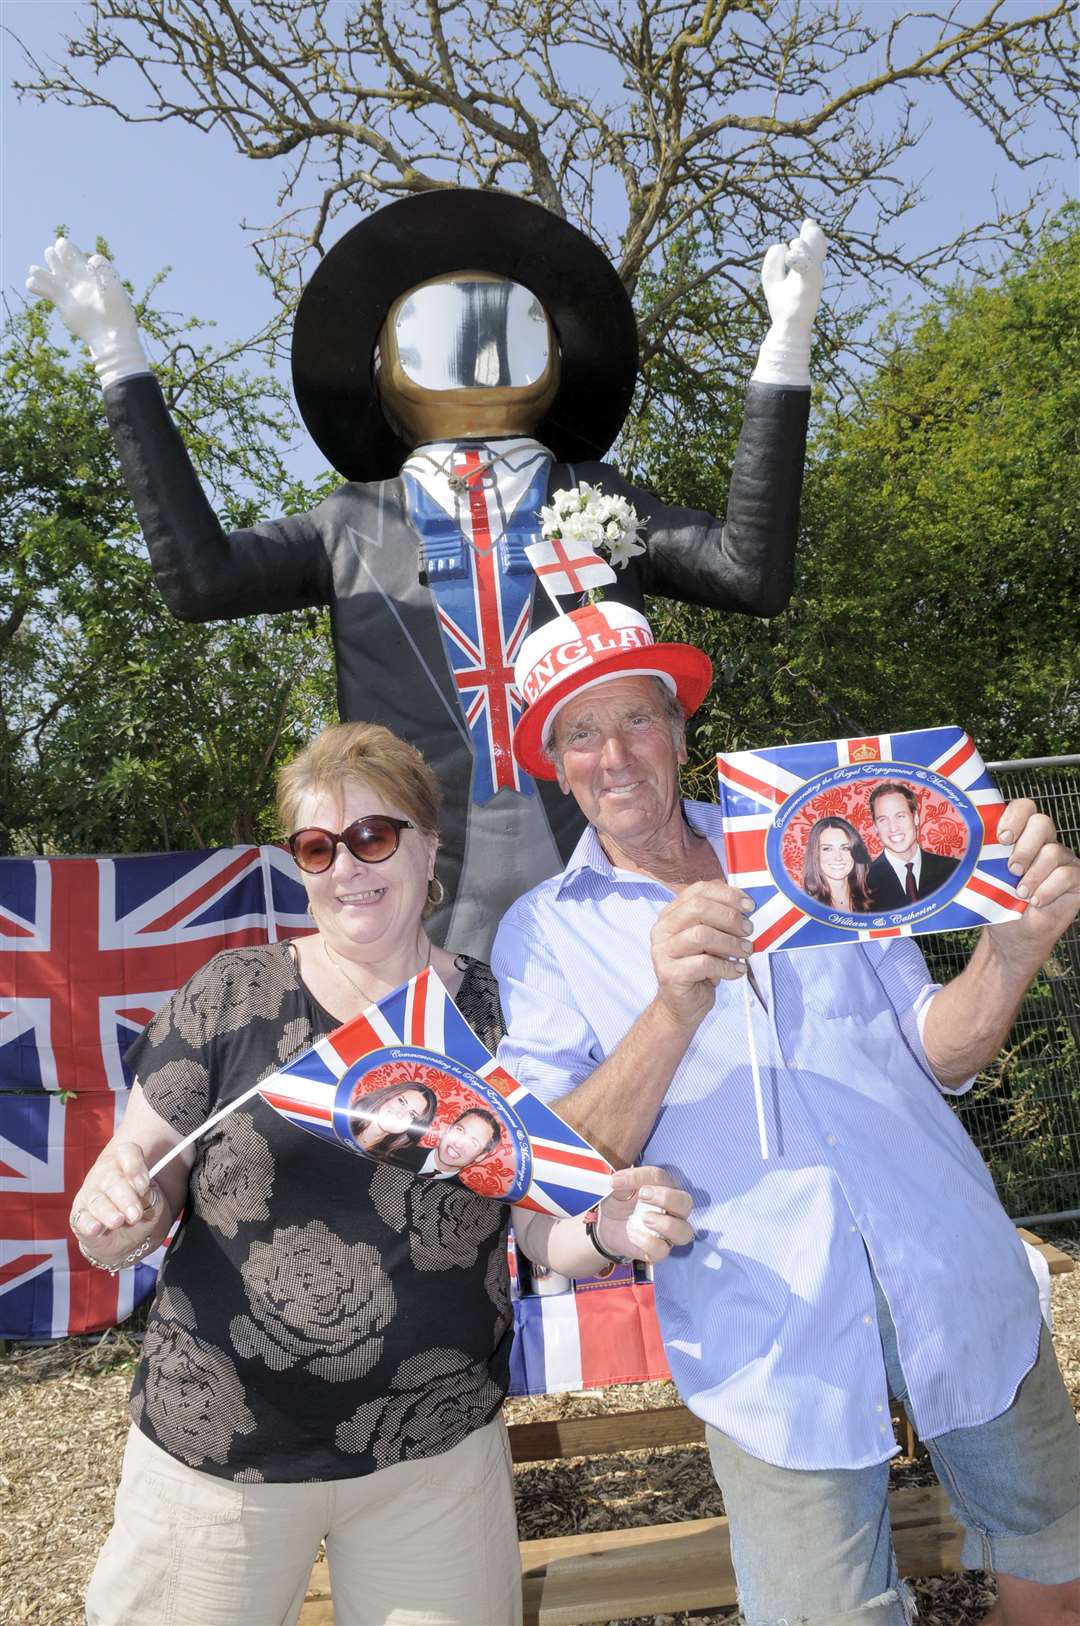 Cllrs Val Harris and Dave Purssord with the Big Man, painted as a groom when he was dressed up for the Royal Wedding in 2011